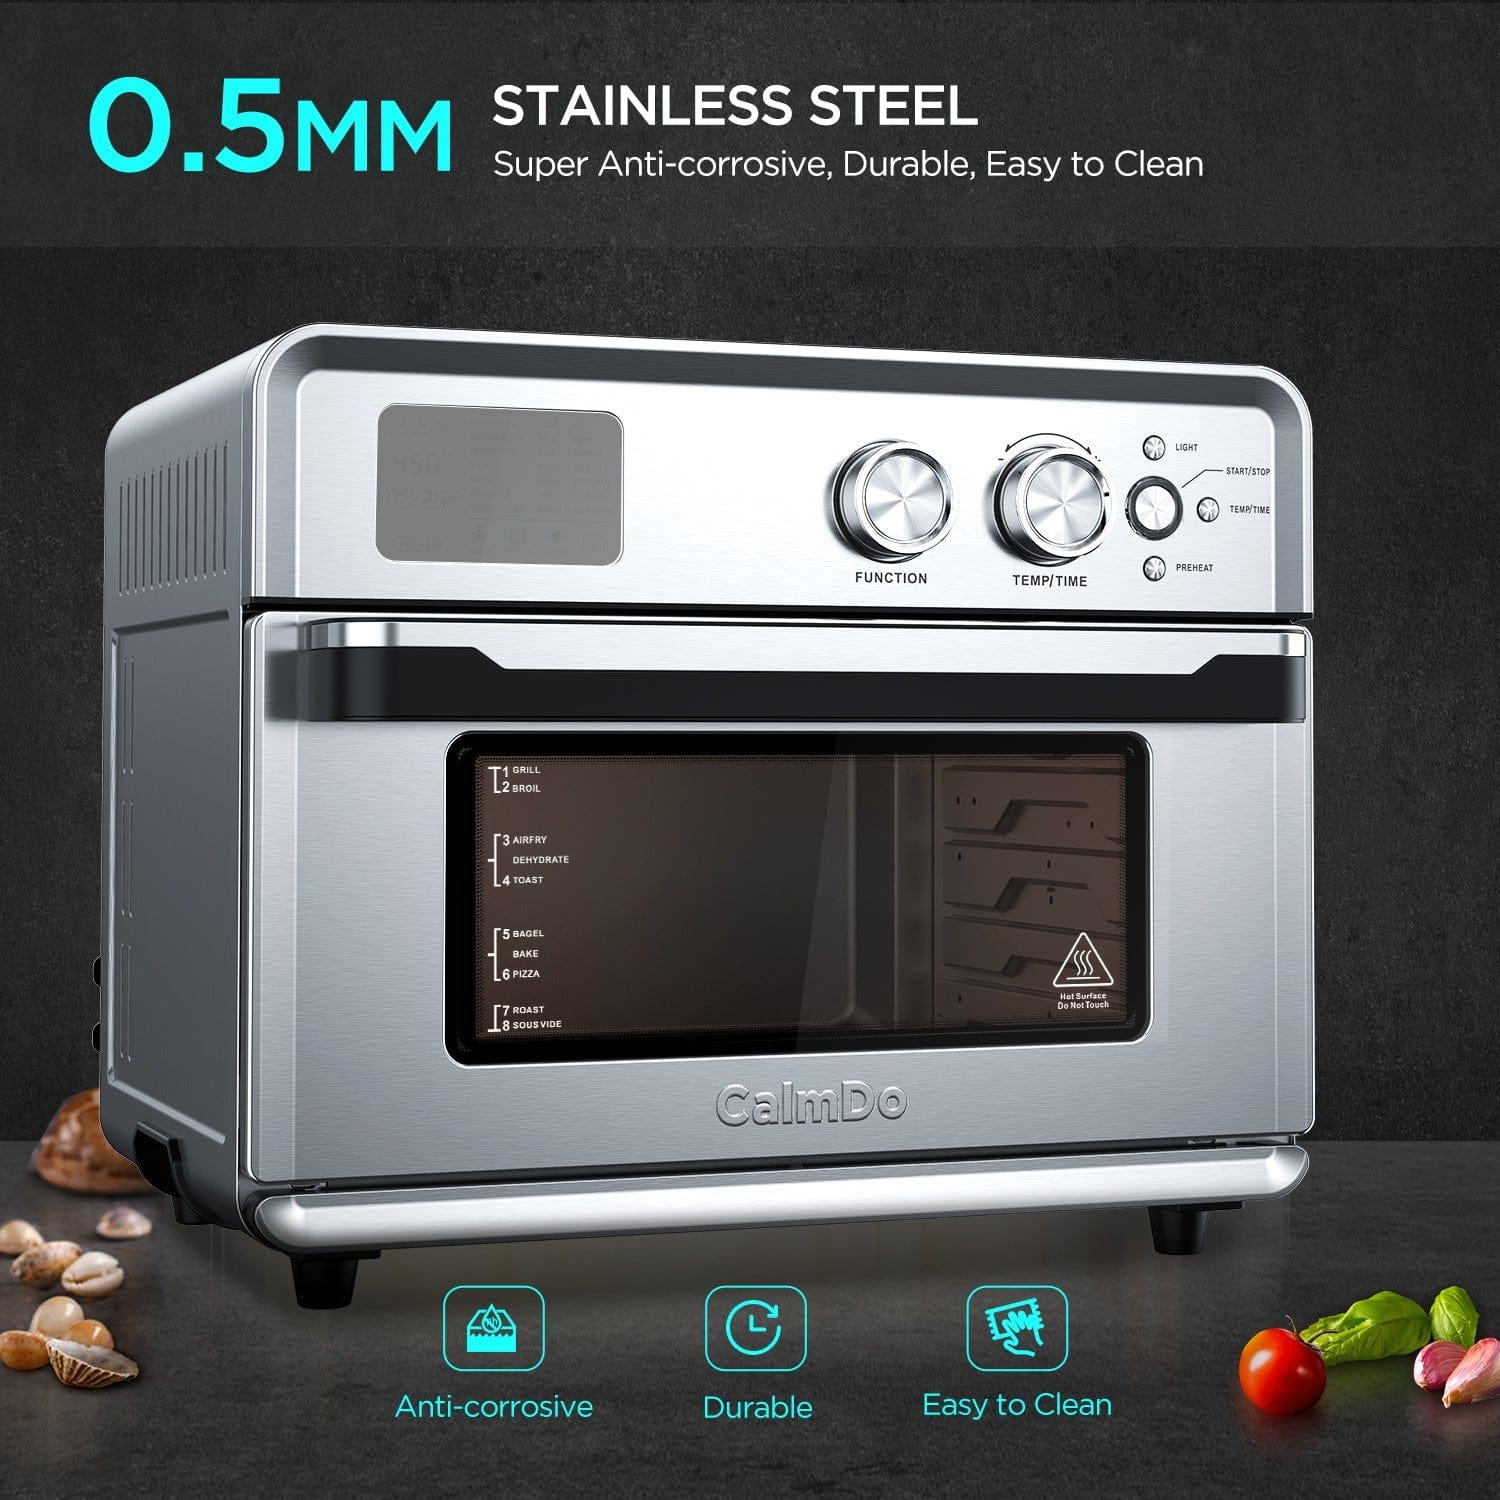 CalmDo AF25L Toaster Oven, CalmDo 26.3QT Large Air Fryer Convection Oven, Fry Oil-Free, 21 Preset Cooking Functions, Stainless Steel - image 6 of 10